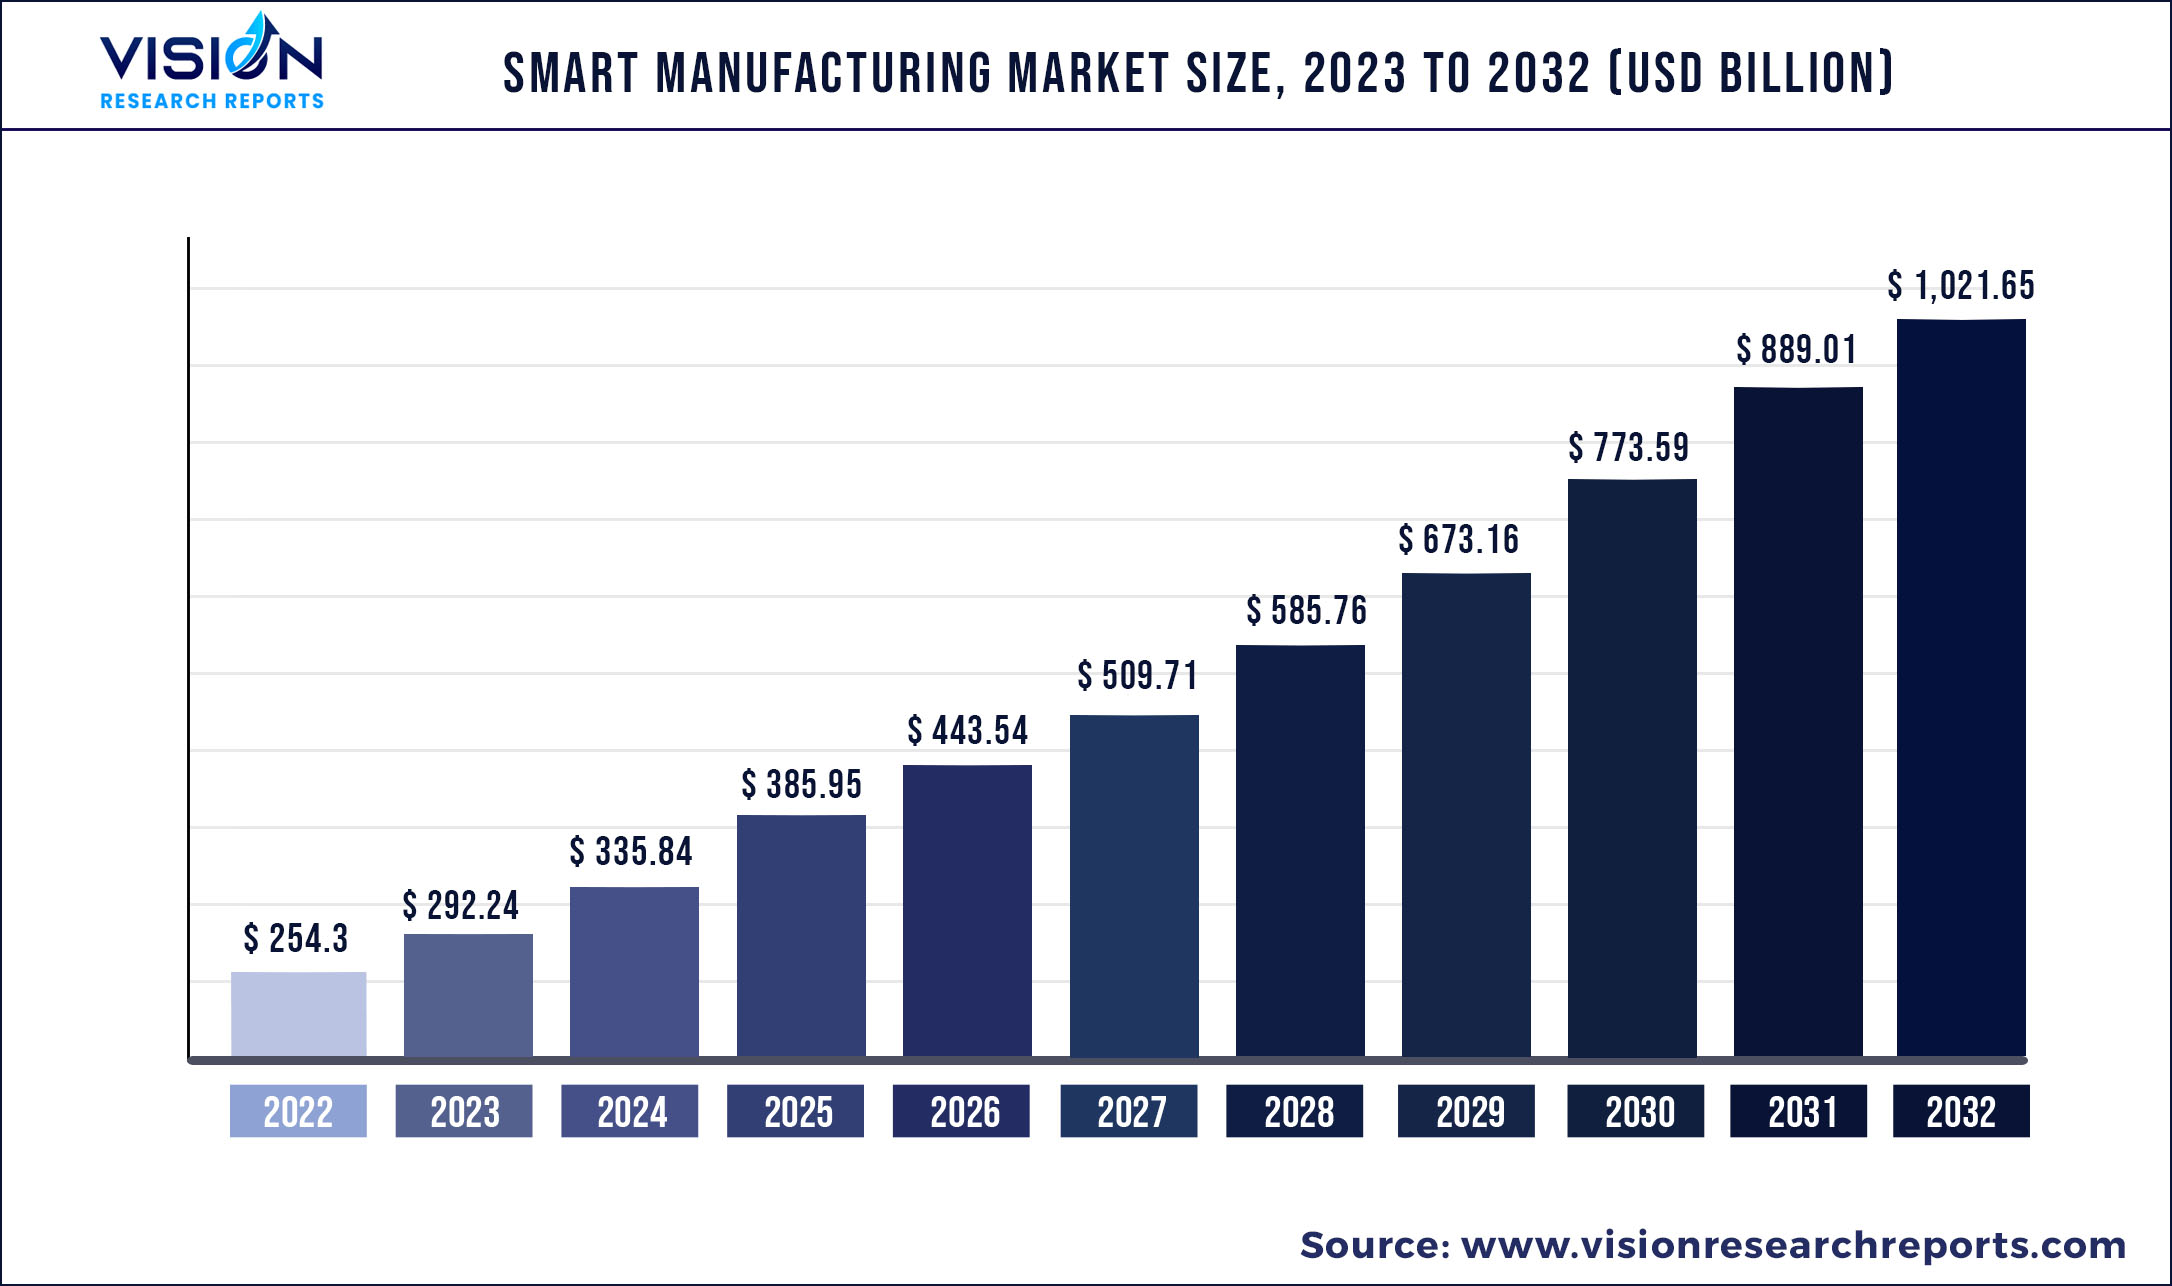 Smart Manufacturing Market Size 2023 to 2032